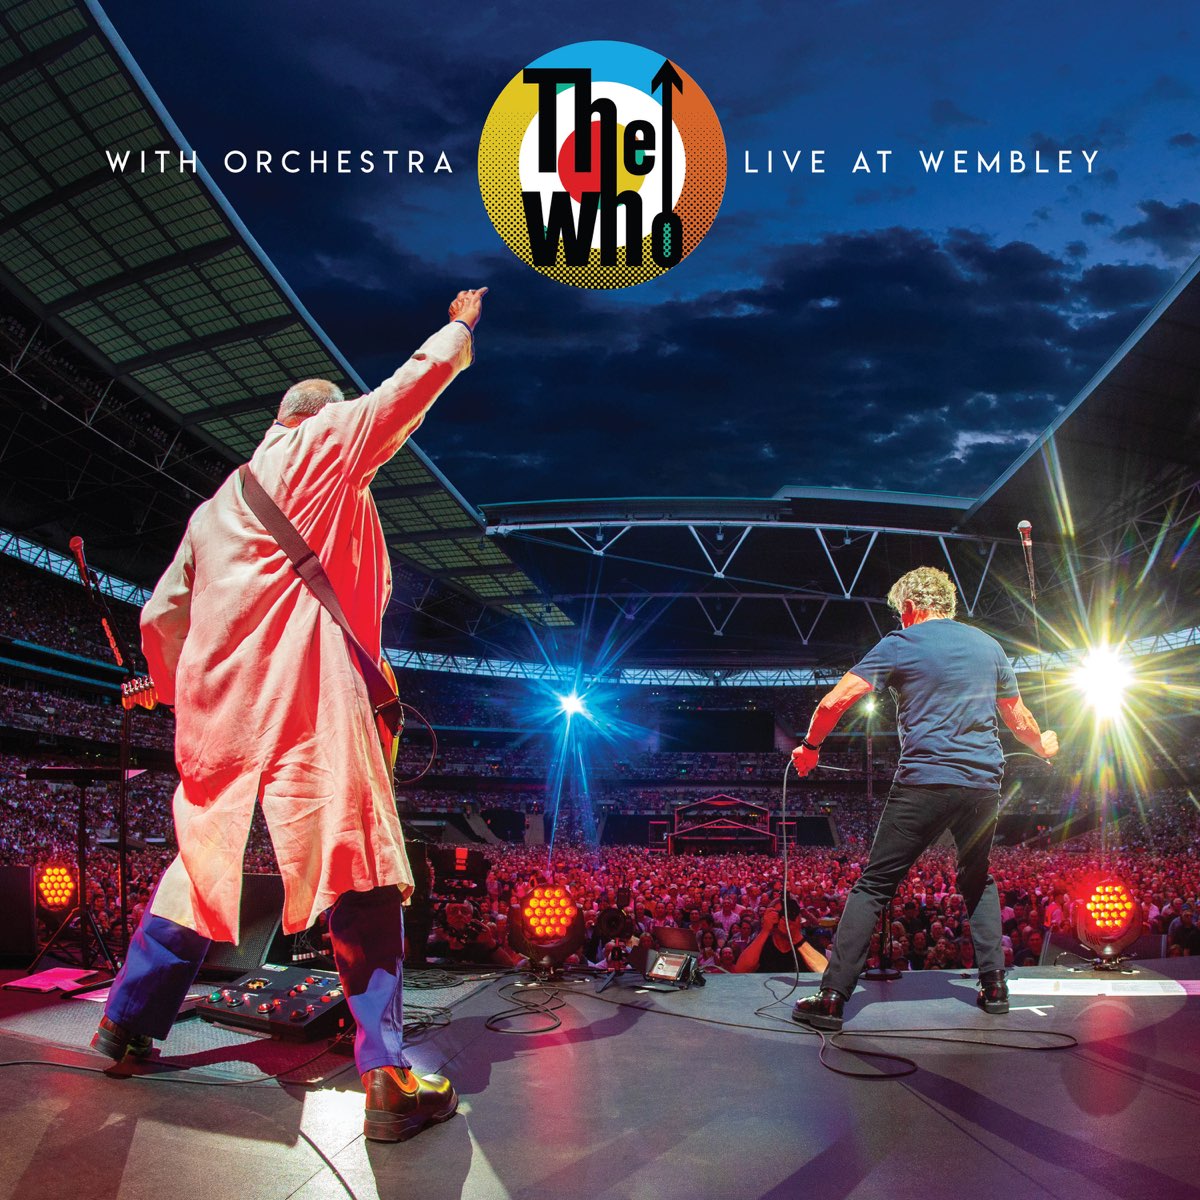 The Who With Orchestra: Live At Wembley de The Who & Isobel Griffiths  Orchestra en Apple Music